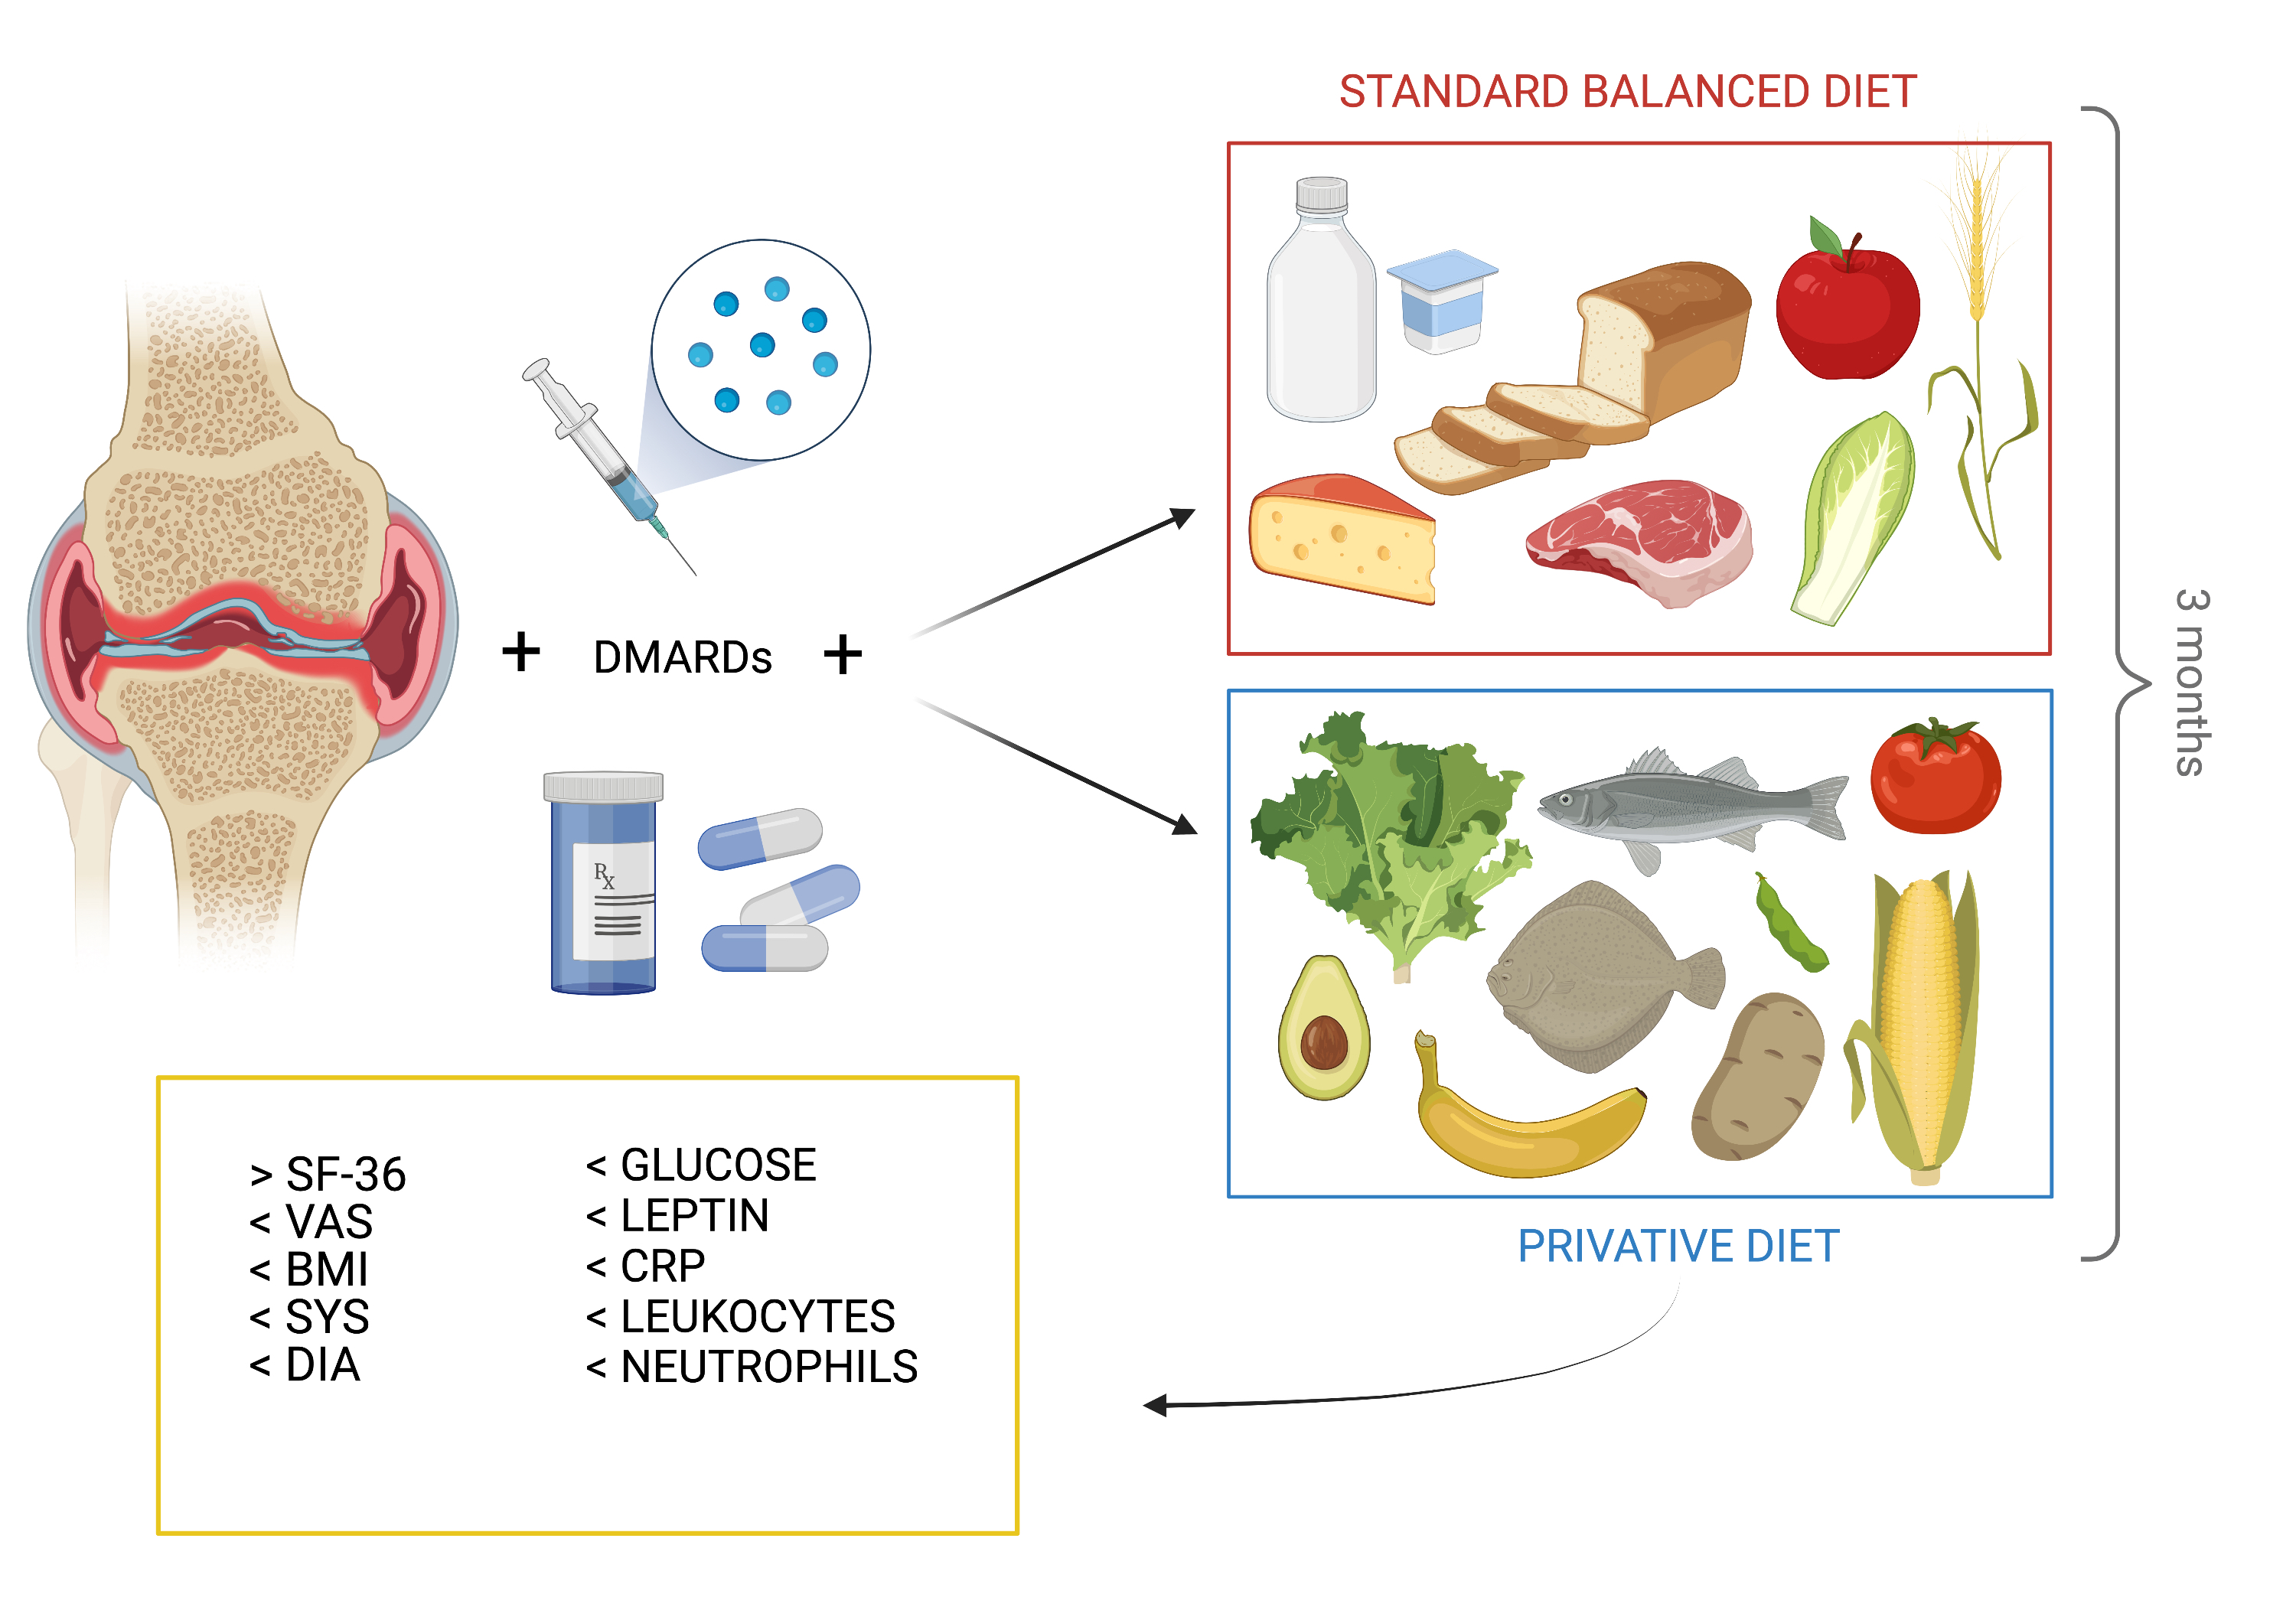 Proposed Anti-Inflammatory Diet Reduces Inflammation in Compliant,  Weight-Stable Patients with Rheumatoid Arthritis in a Randomized Controlled  Crossover Trial - ScienceDirect